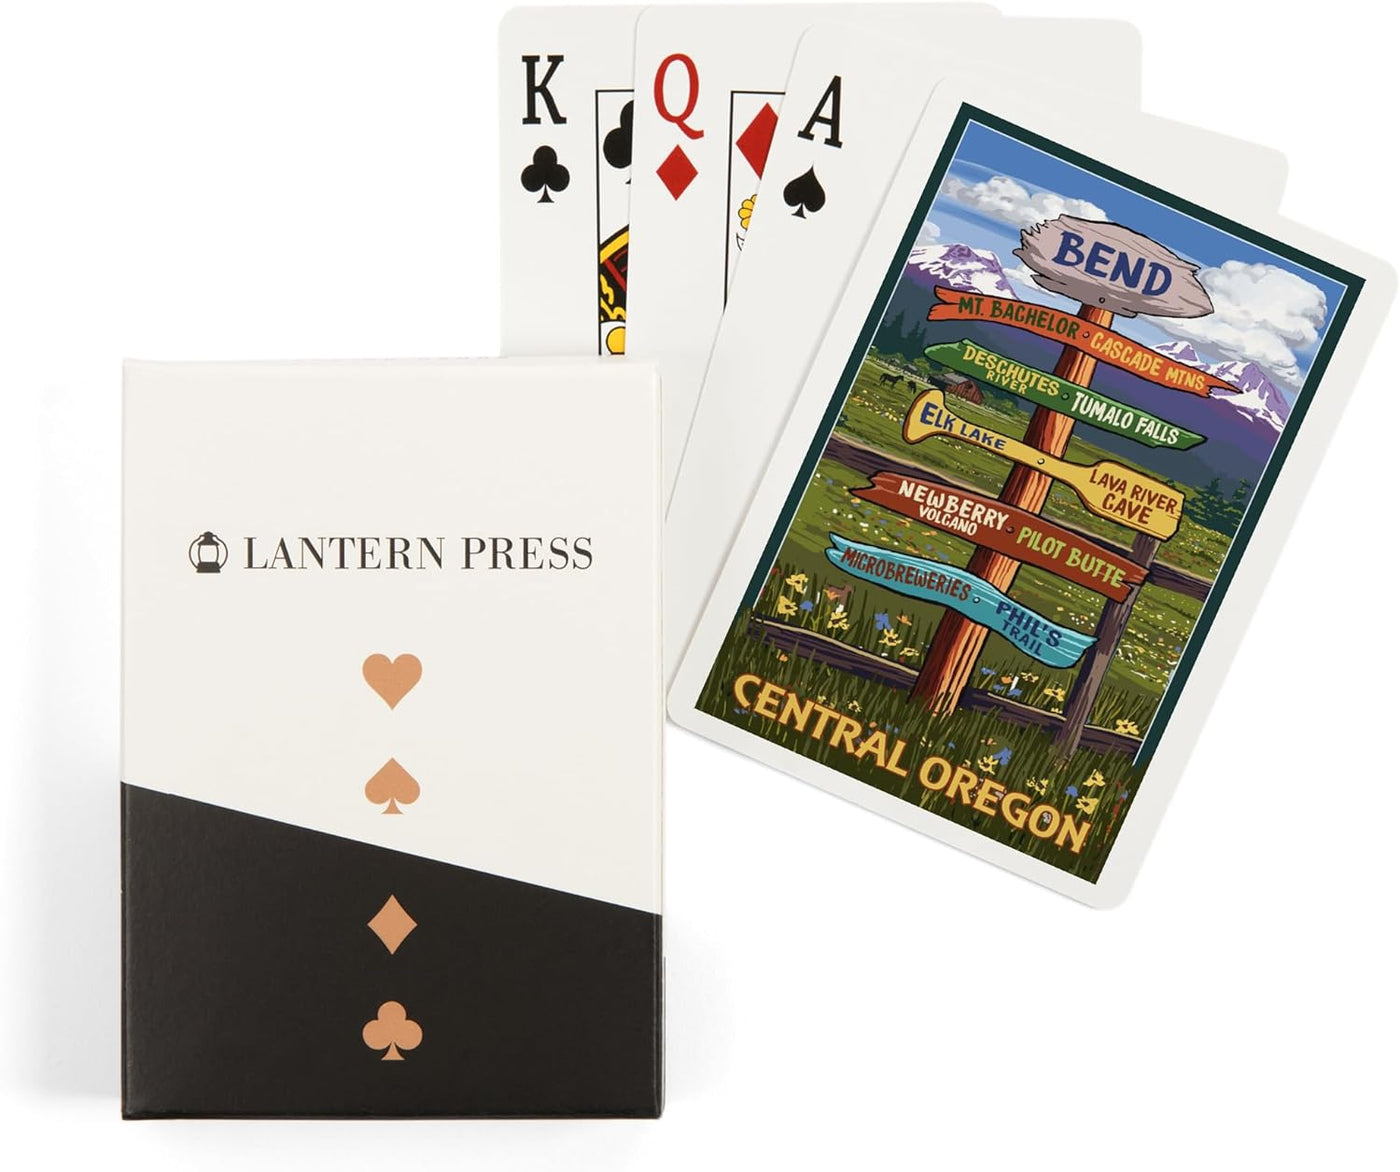 Central Oregon Signpost Playing Cards